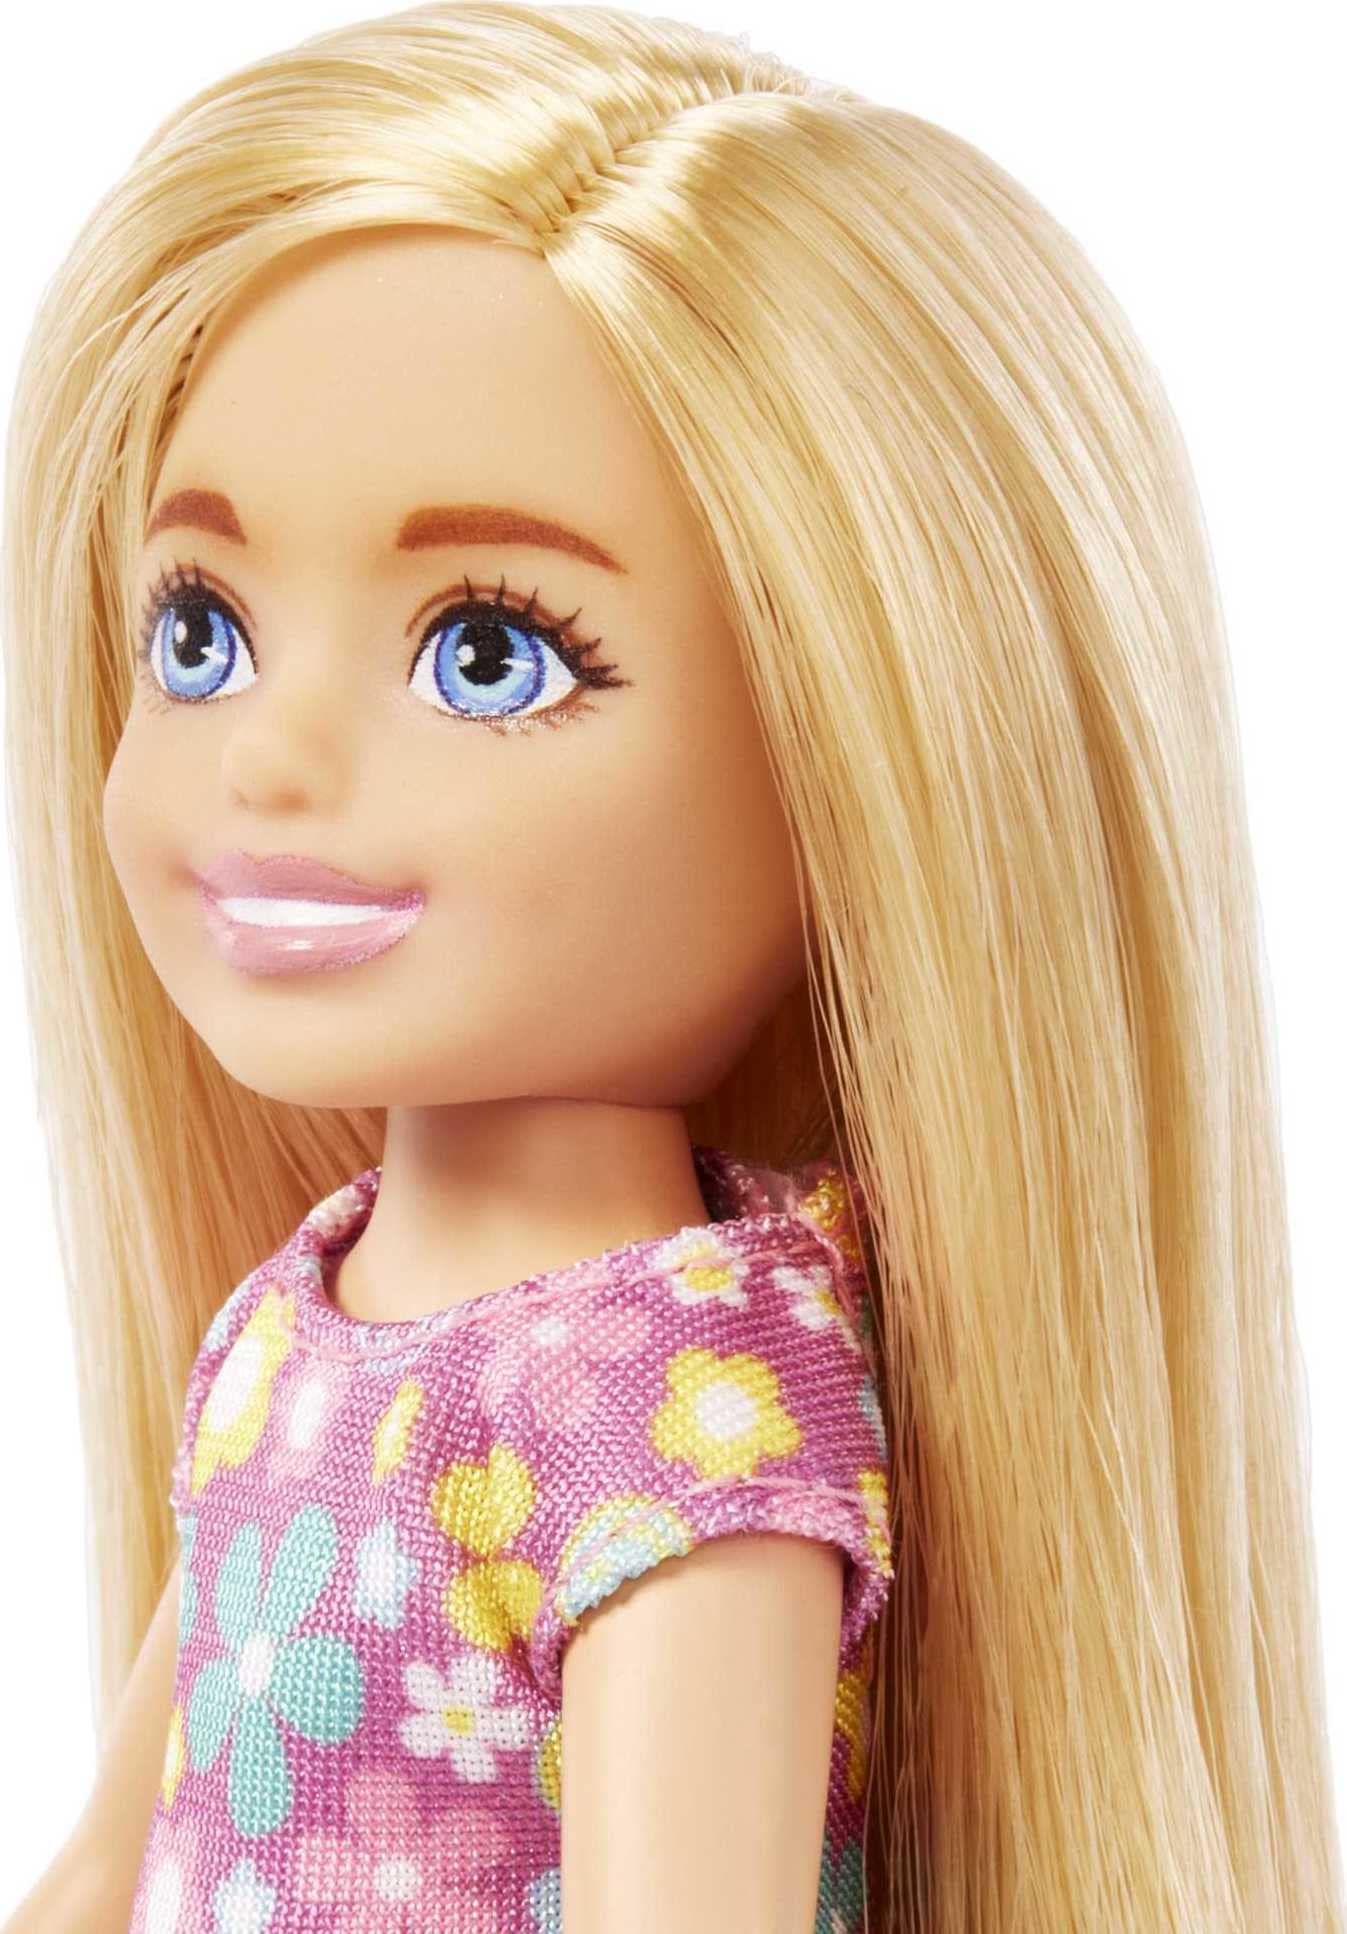 Barbie Chelsea Doll, Small Doll with Long Blonde Hair & Blue Eyes Wearing Removable Purple Flowered Dress & Yellow Shoes